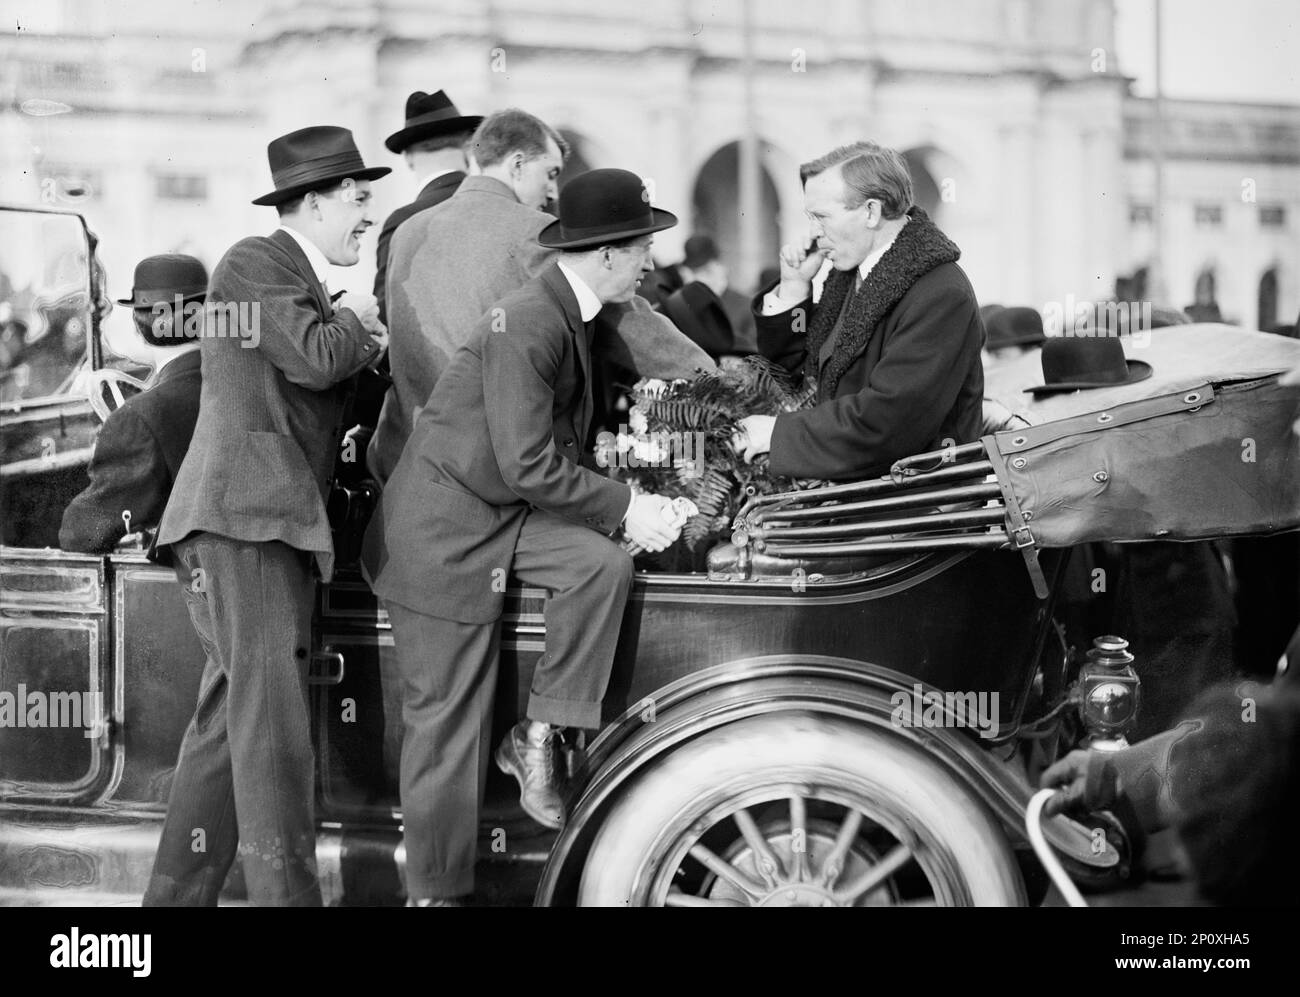 'Butch' McDevitt, 'Congressman For A Day' from Pennsylvania, in Auto, 1914. [Millionaire for a Day?]. Stock Photo